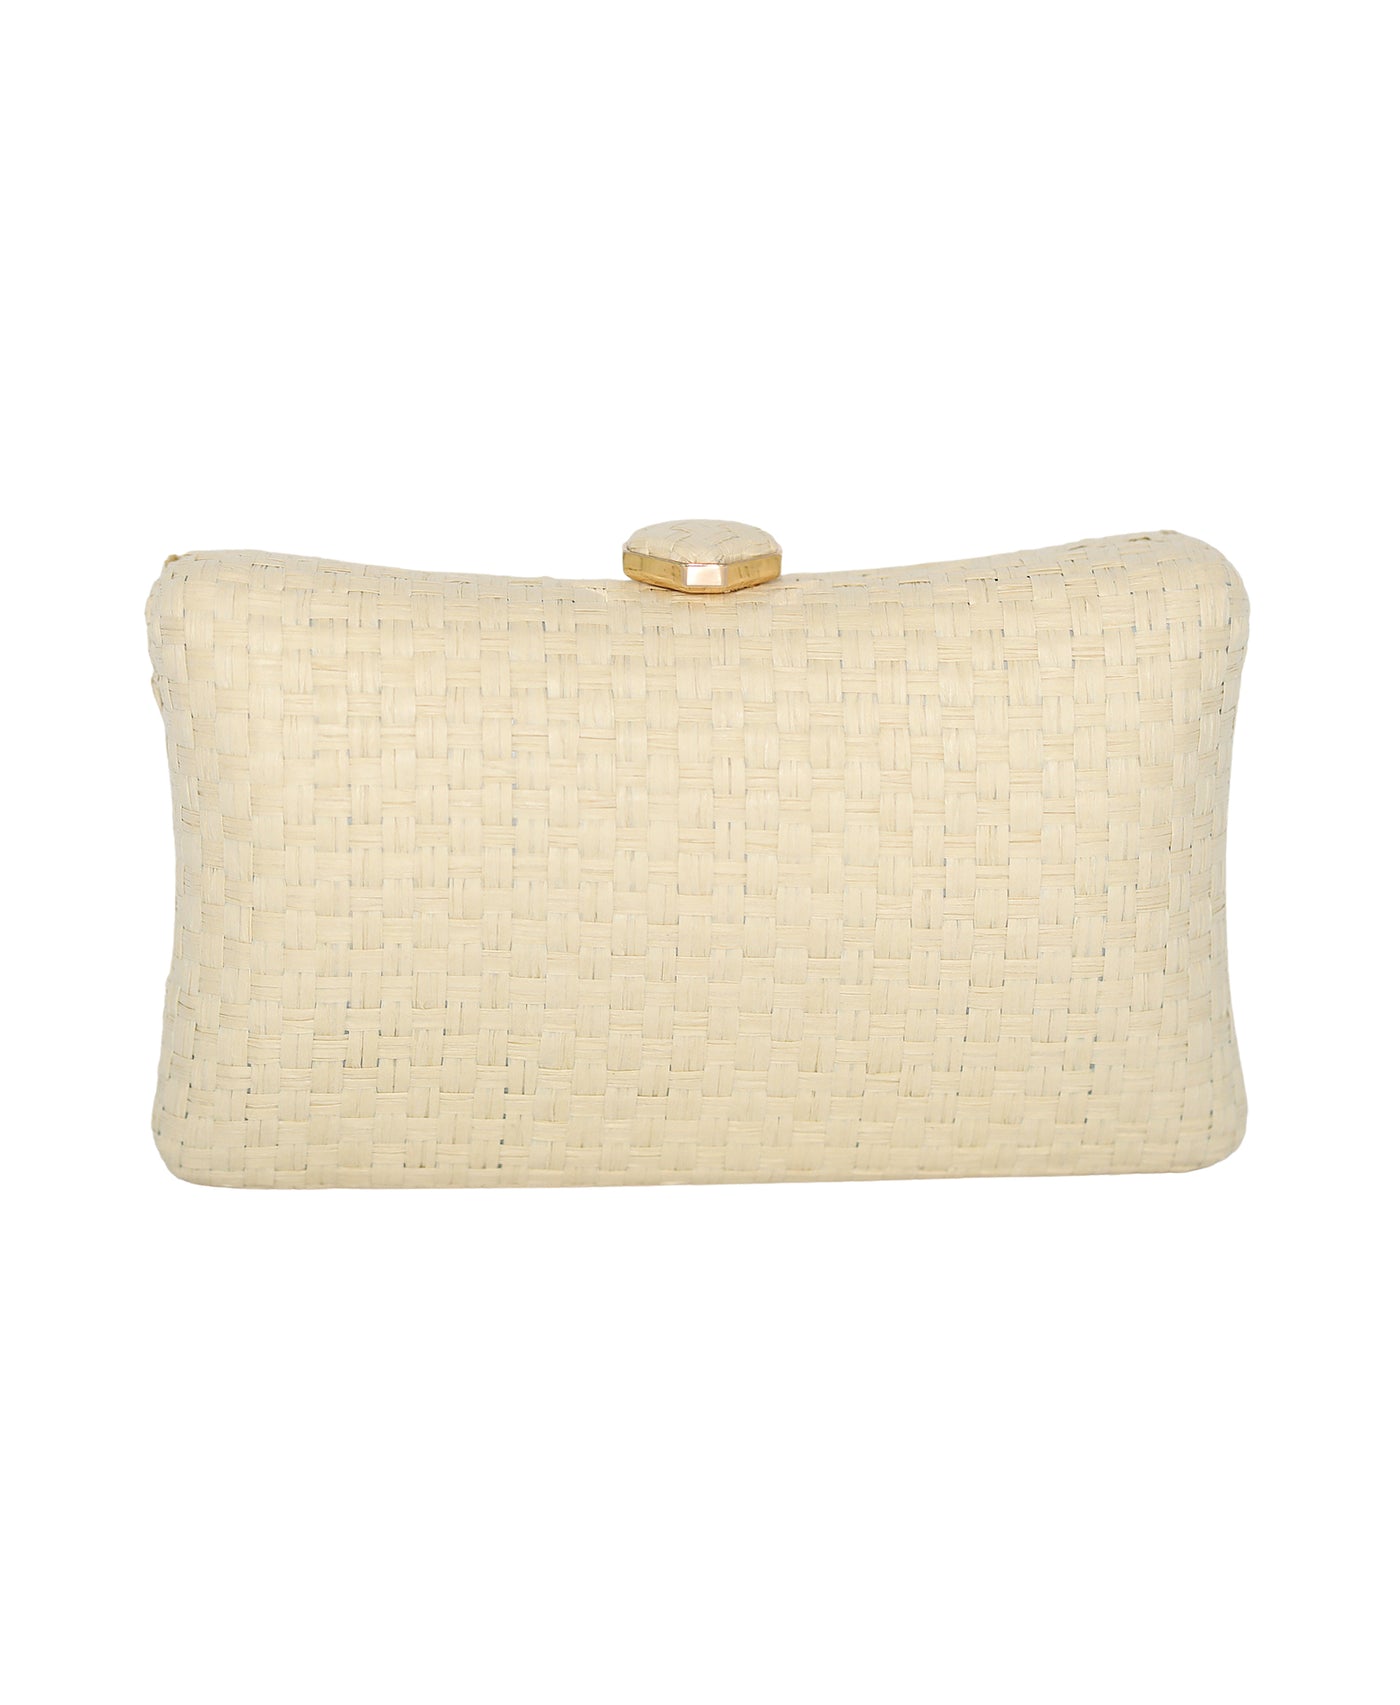 Woven Straw Hard Clutch image 1